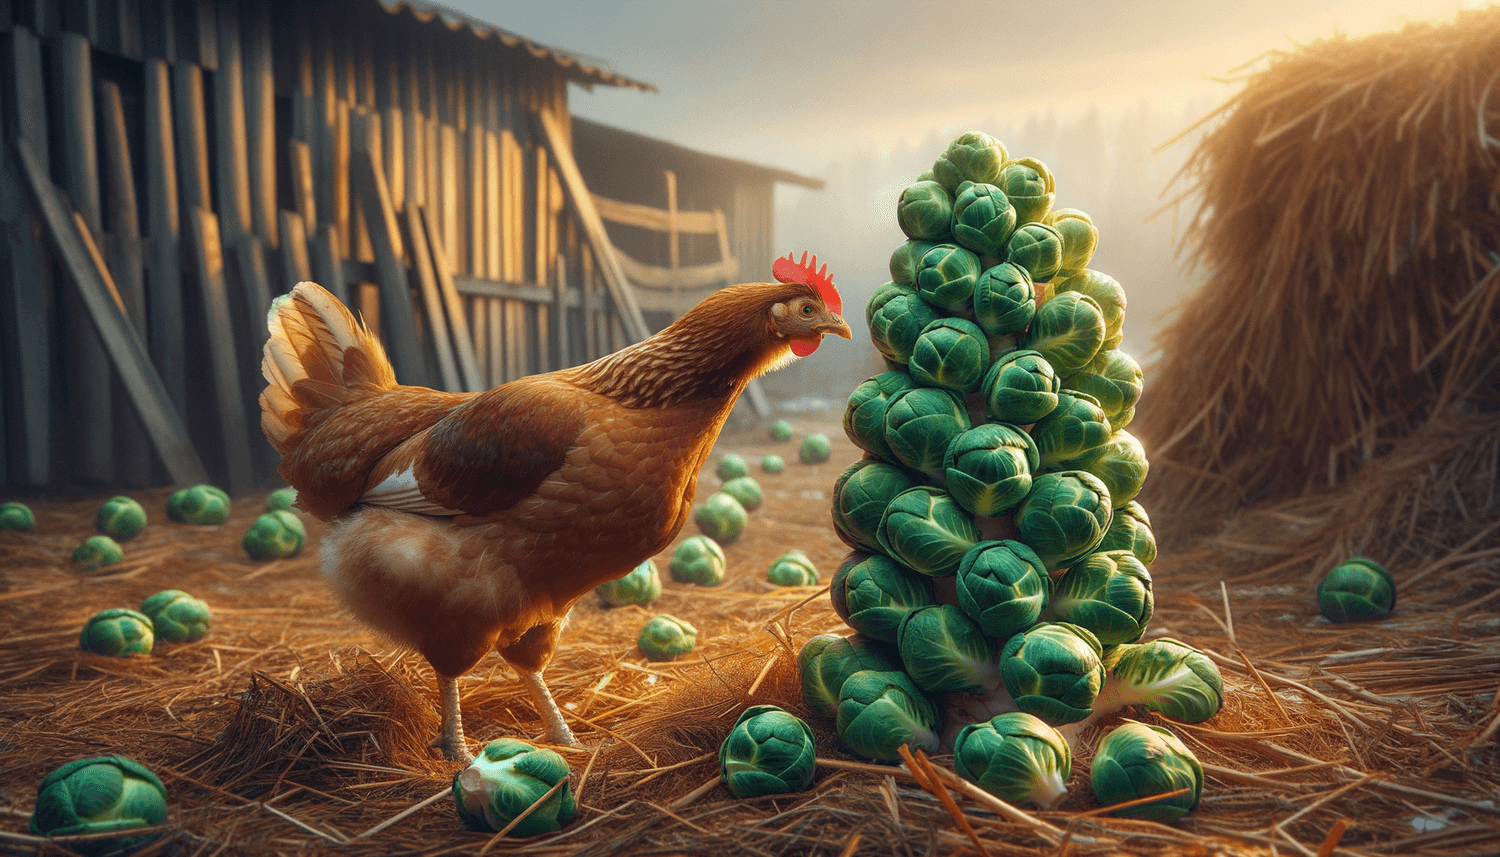 Can Chickens Eat Brussel Sprout Stalks?